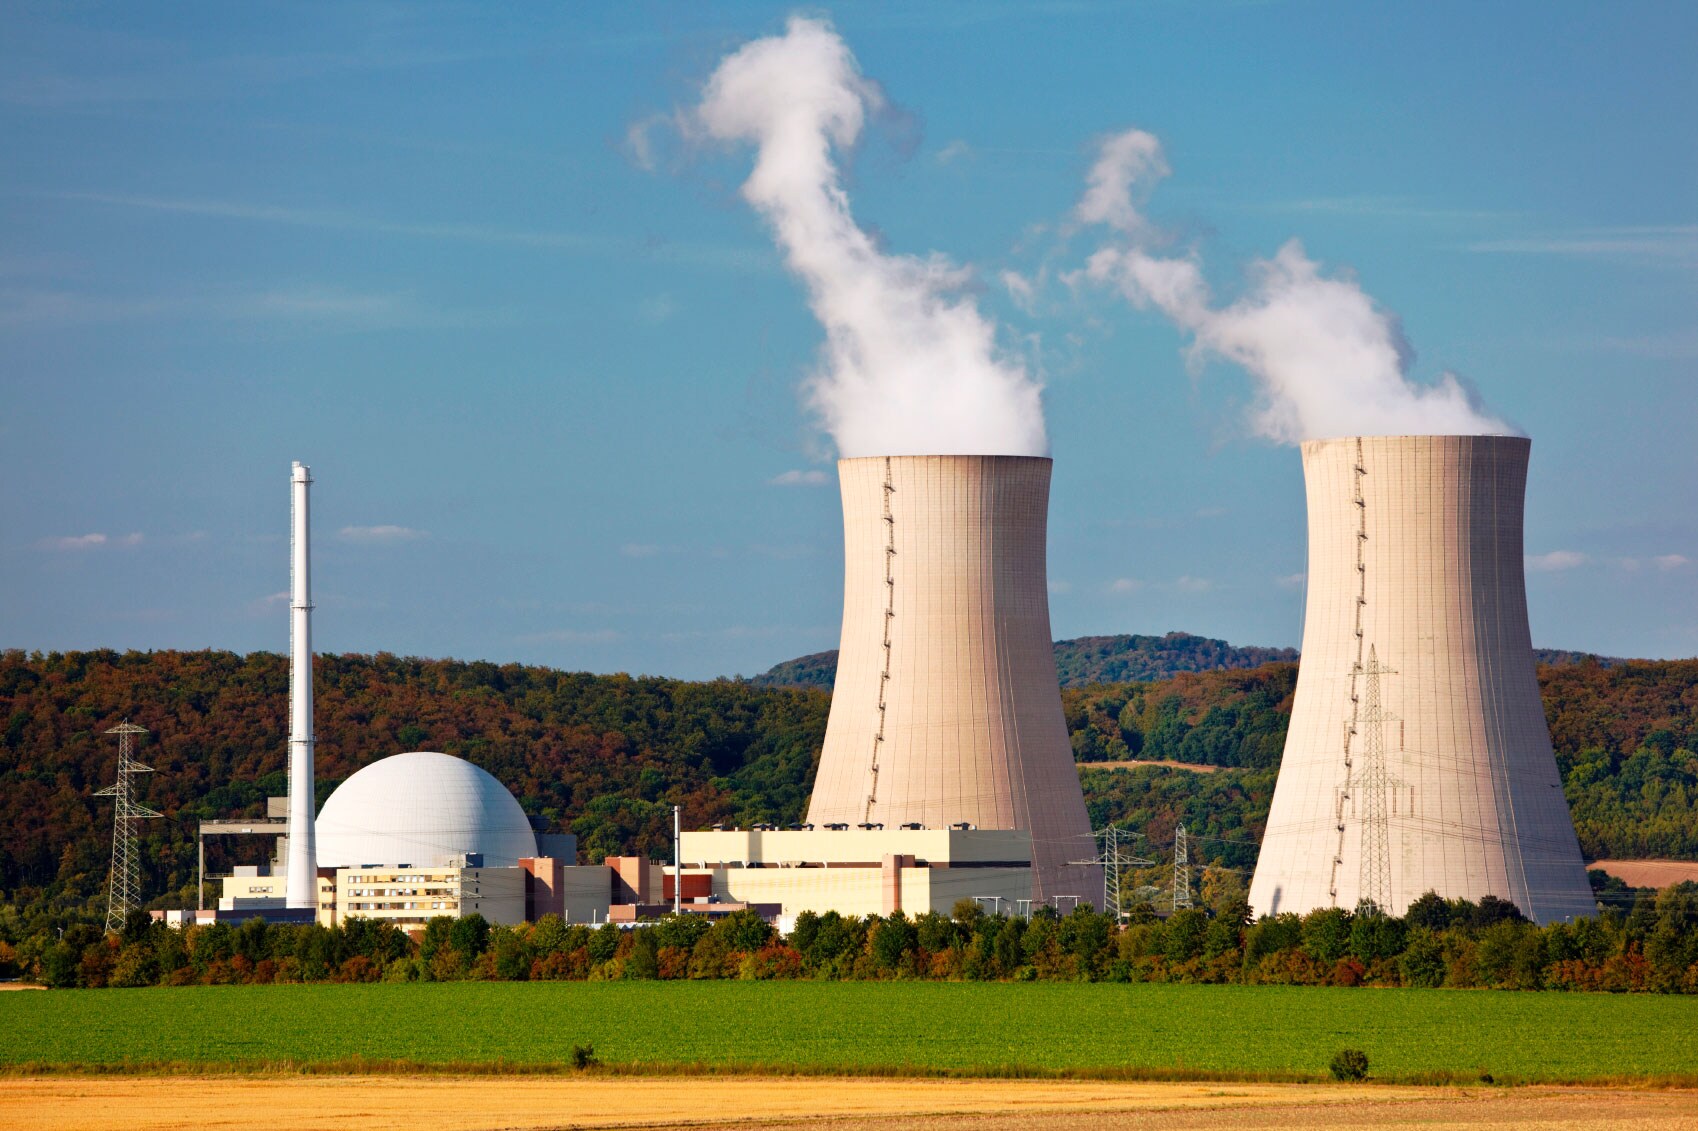 Swagelok offers a line of Nuclear compliant products.